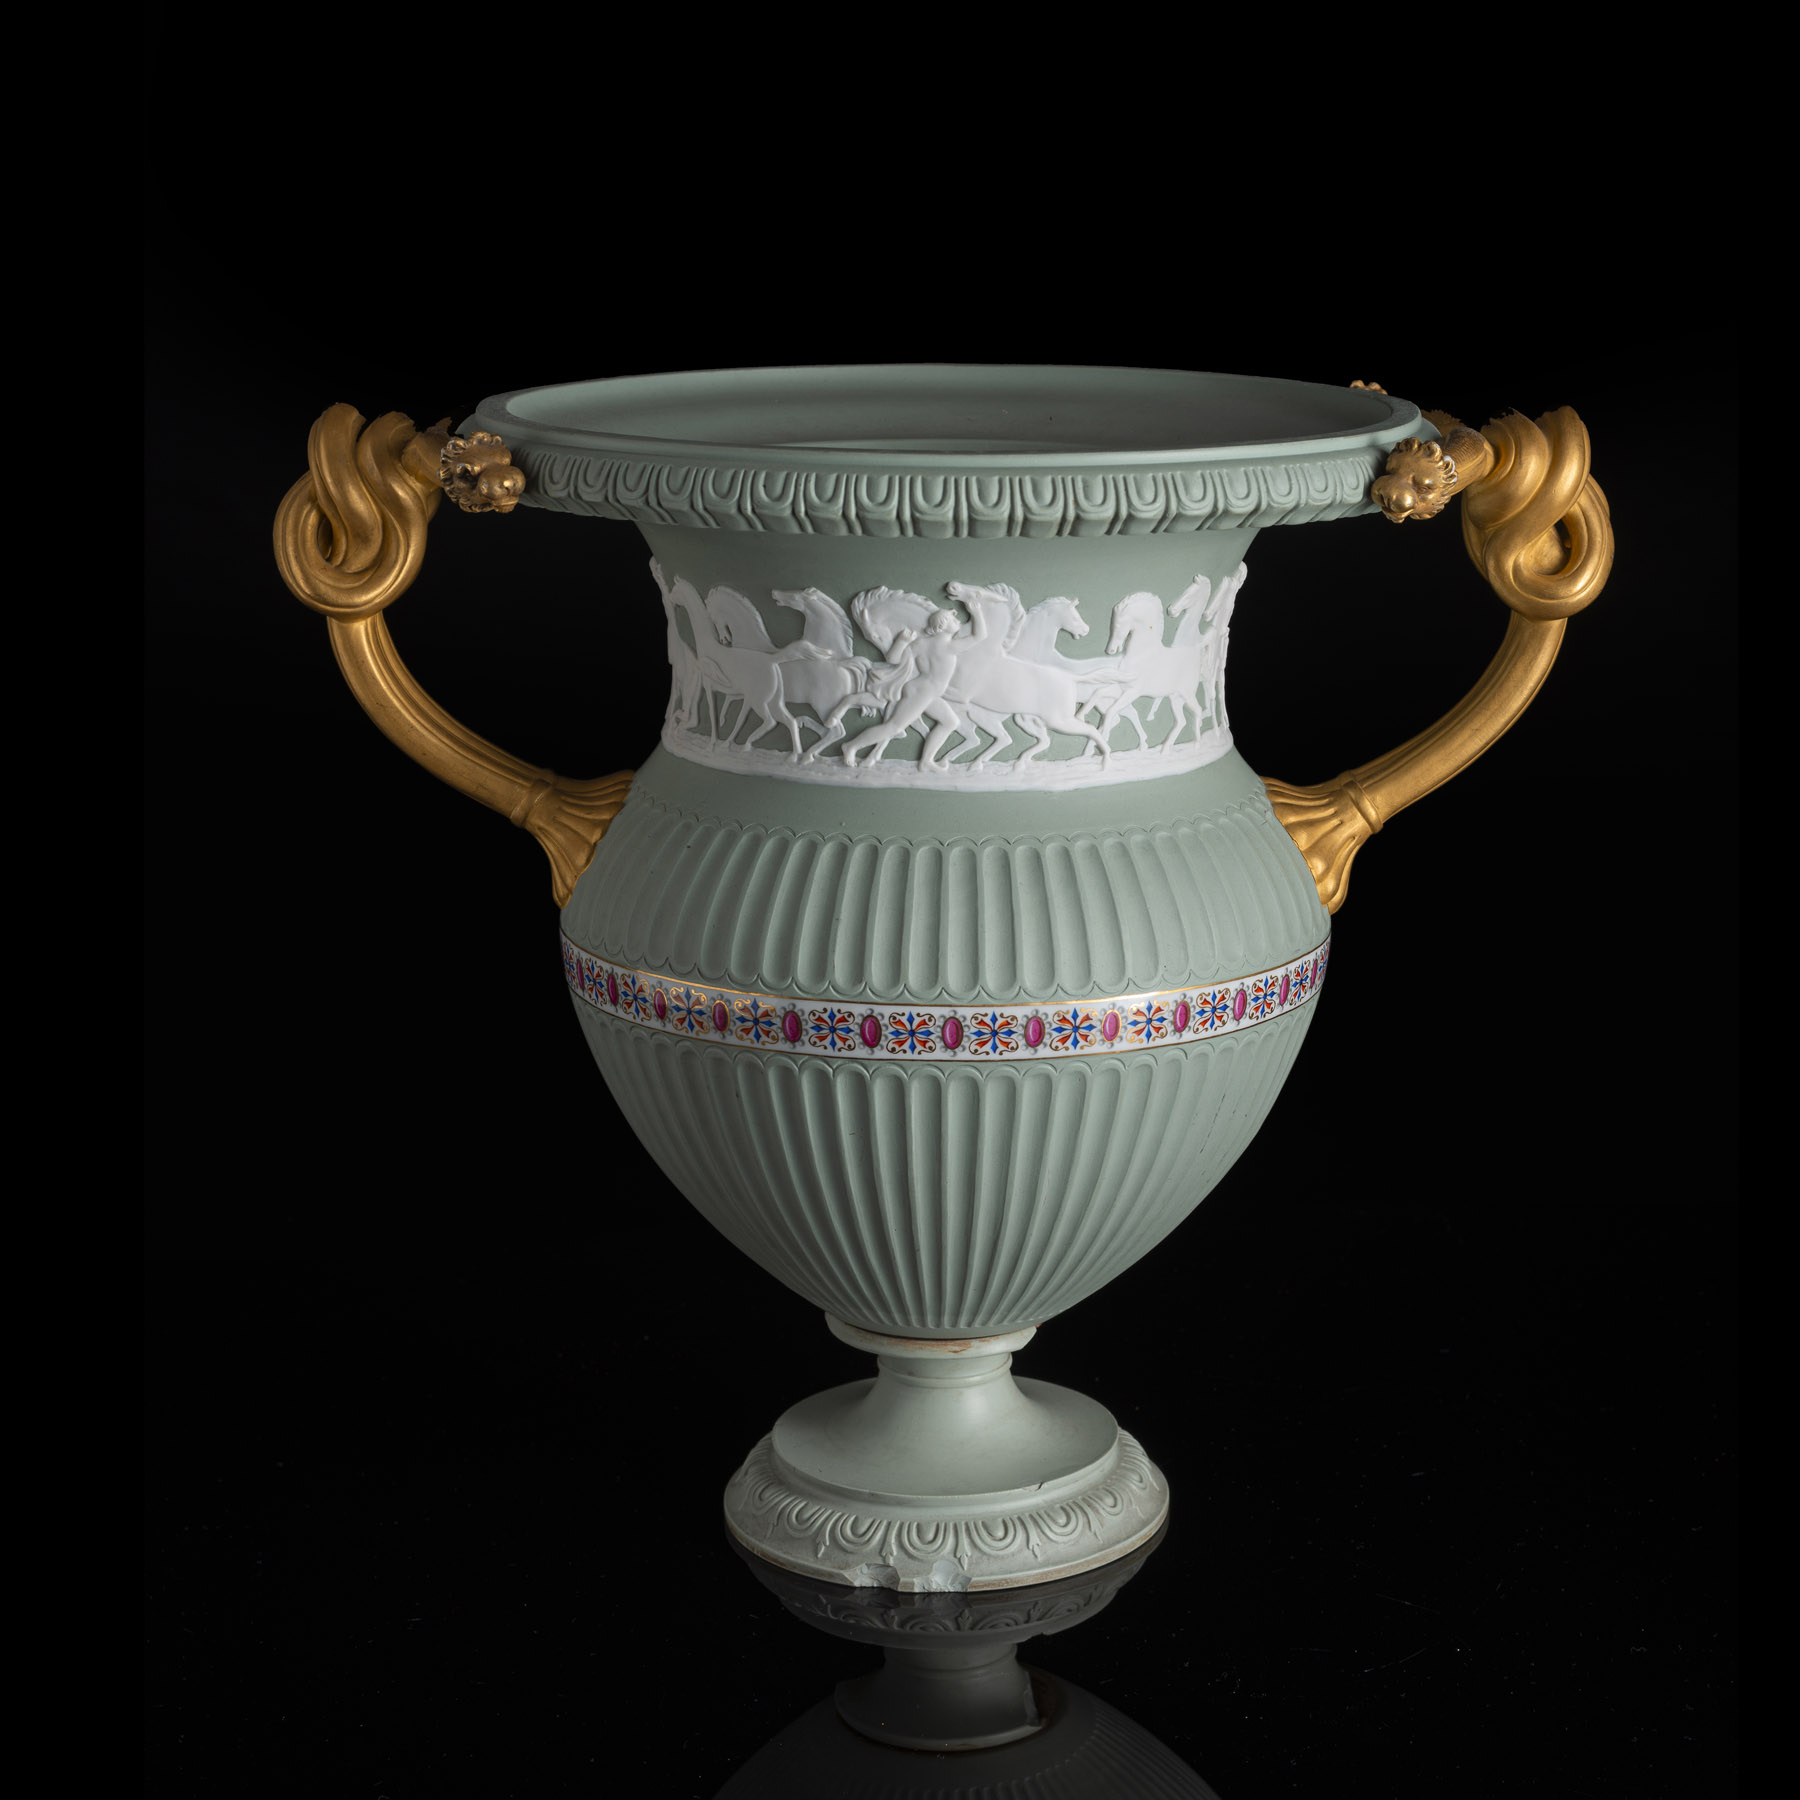 AN EXCEPTIONAL NEOCLASSICAL BISCUIT PORCELAIN VASE